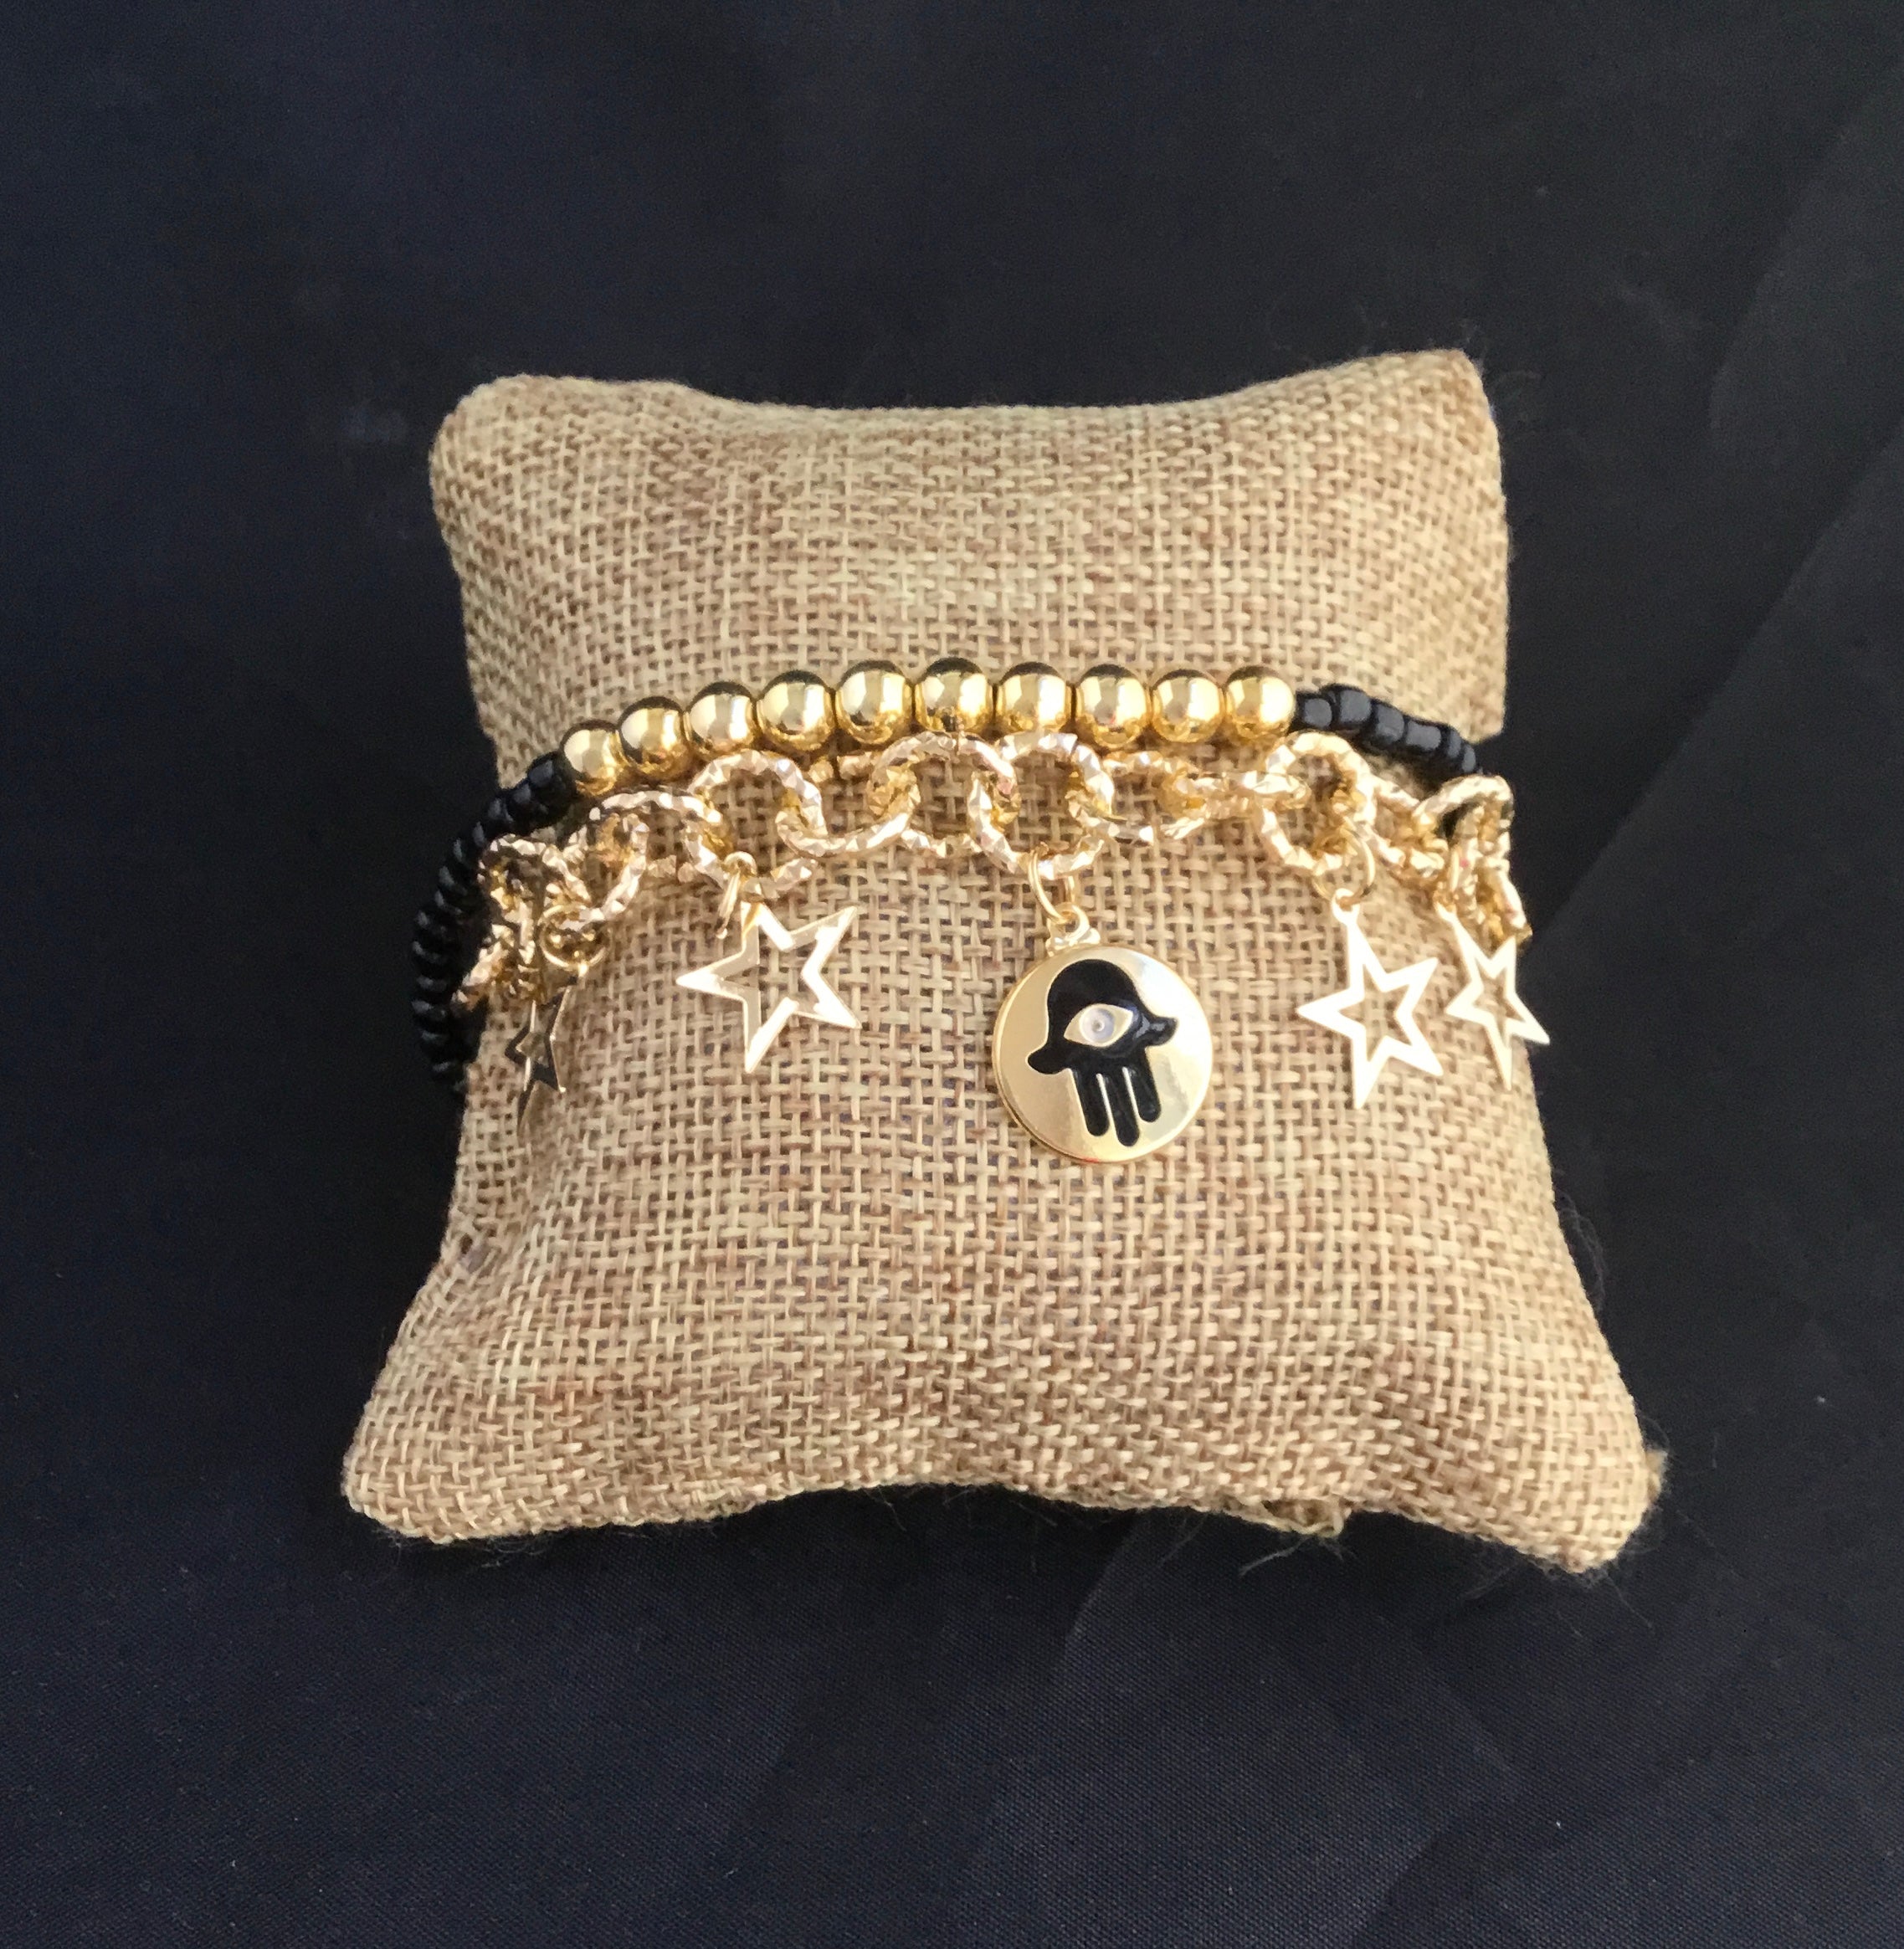 Gold Filled Double Bracelet with Evil Eye Charm